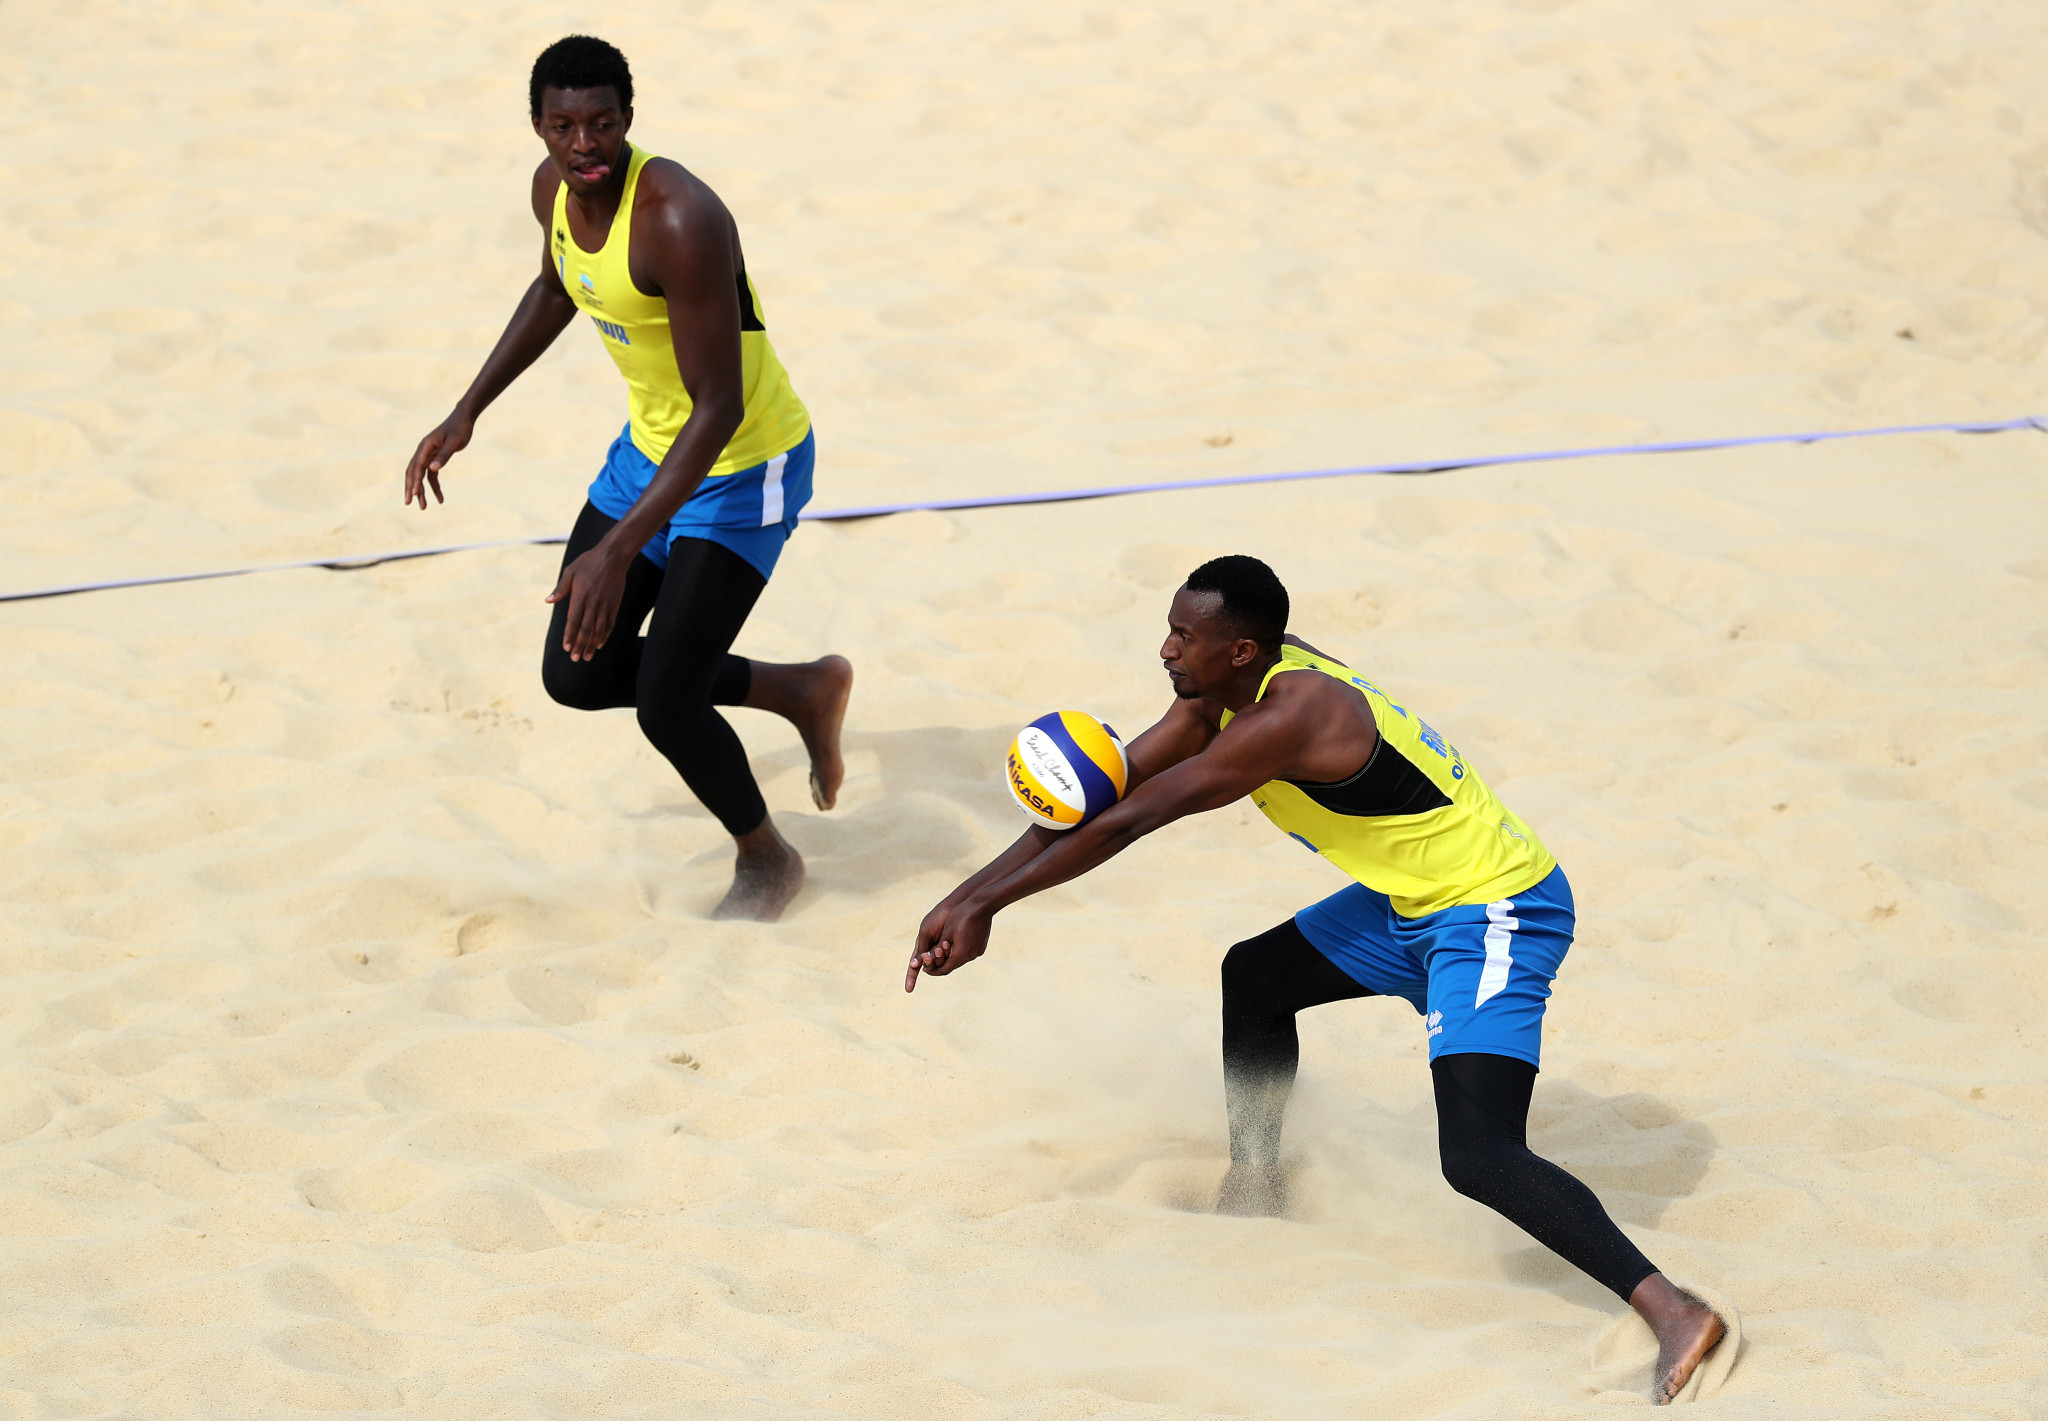 Rwanda claimed victory in men's beach volleyball to move into the semi-finals ©Getty Images